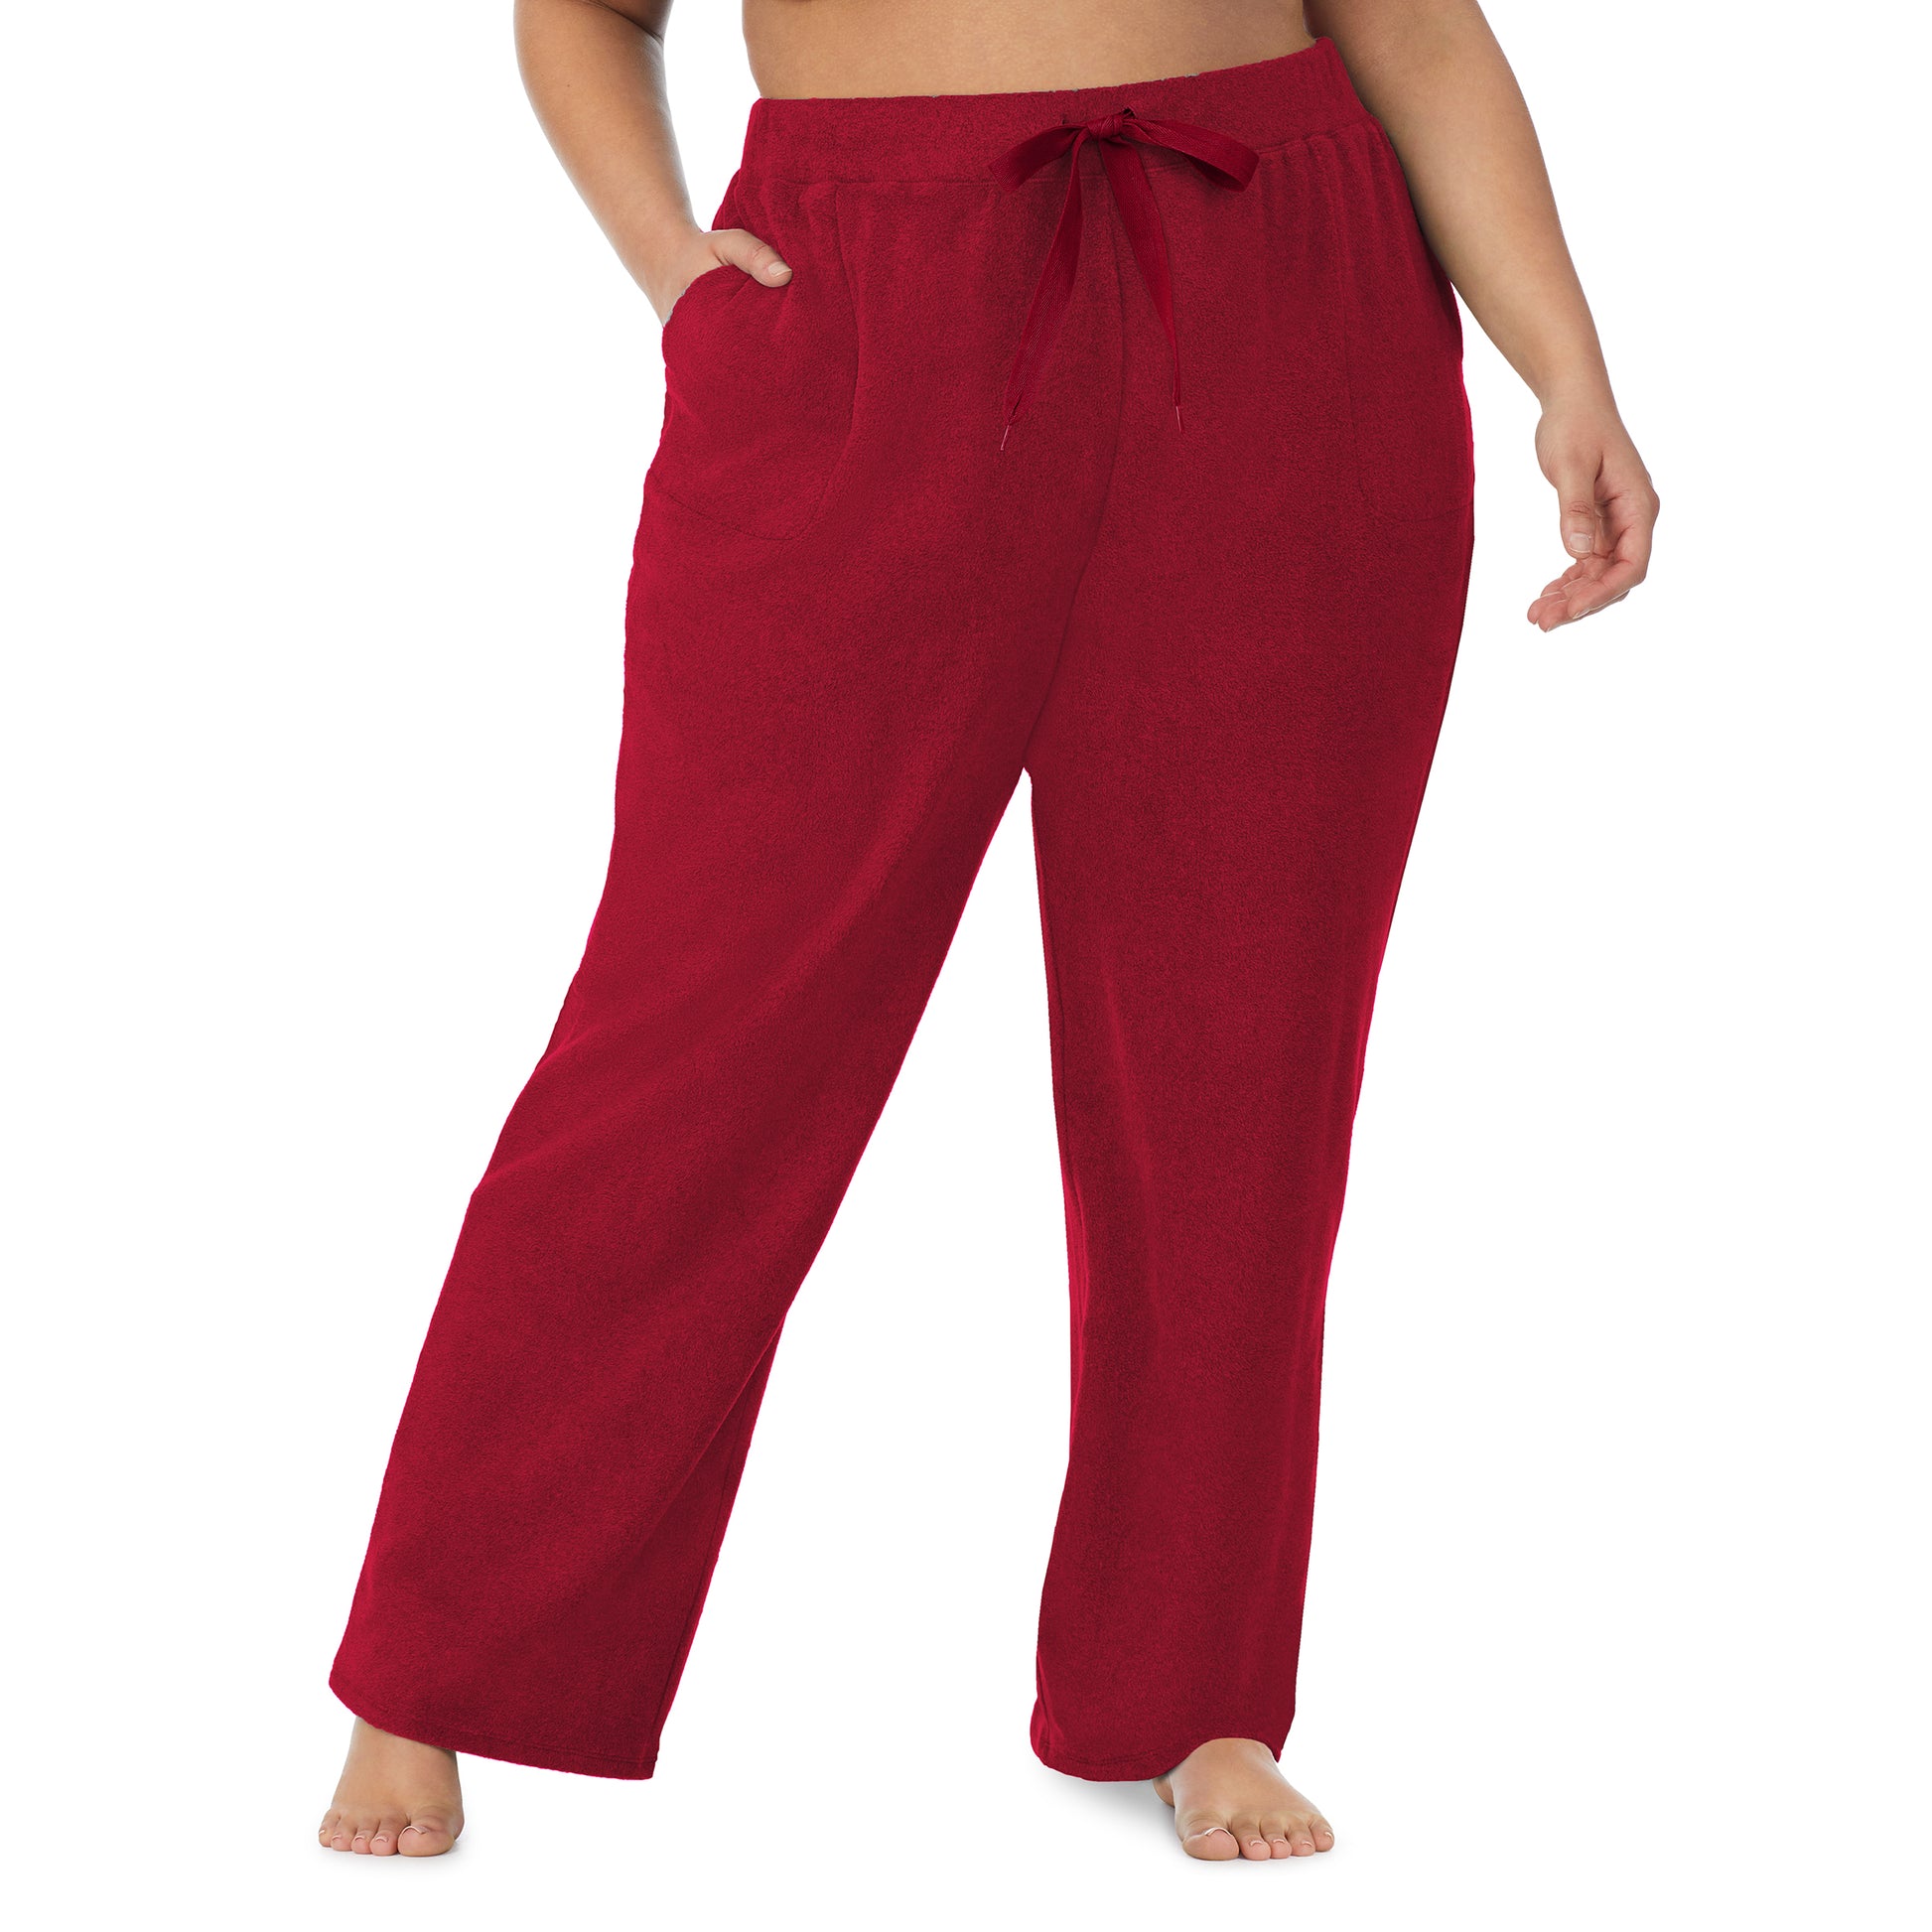 Rhubarb; Model is wearing size 1X. She is 5'9", Bust 38", Waist 36", Hips 48.5".@lower body of a lady wearing red lounge pant